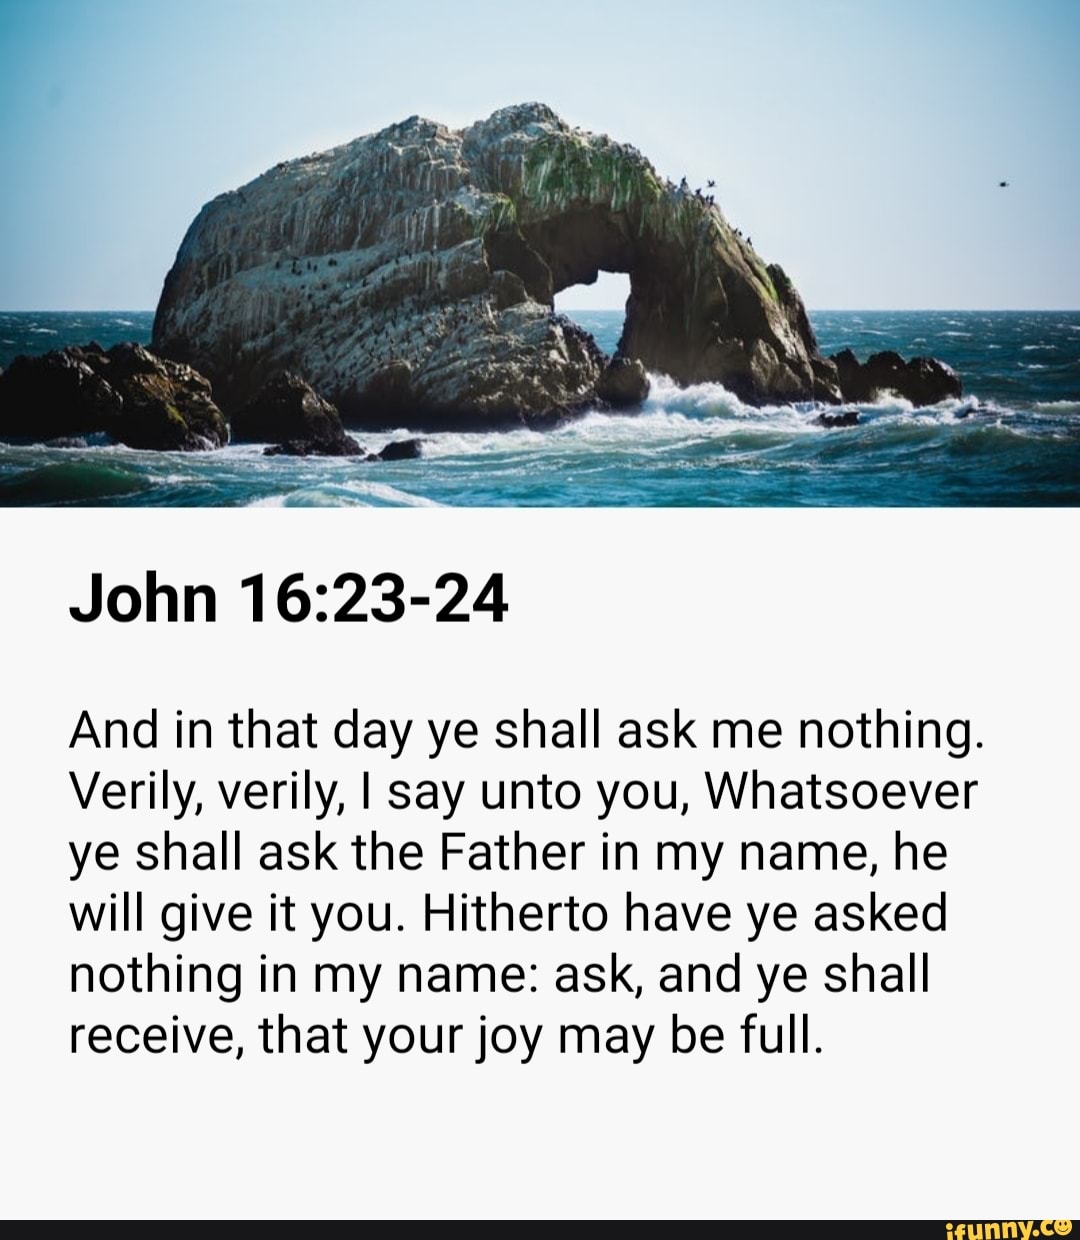 And In That Day Ye Shall Ask Me Nothing Verily Verily I Say Unto You Whatsoever Ye Shall Askthe Father In My Name He Will Give It You Hitherto Have Ye Asked